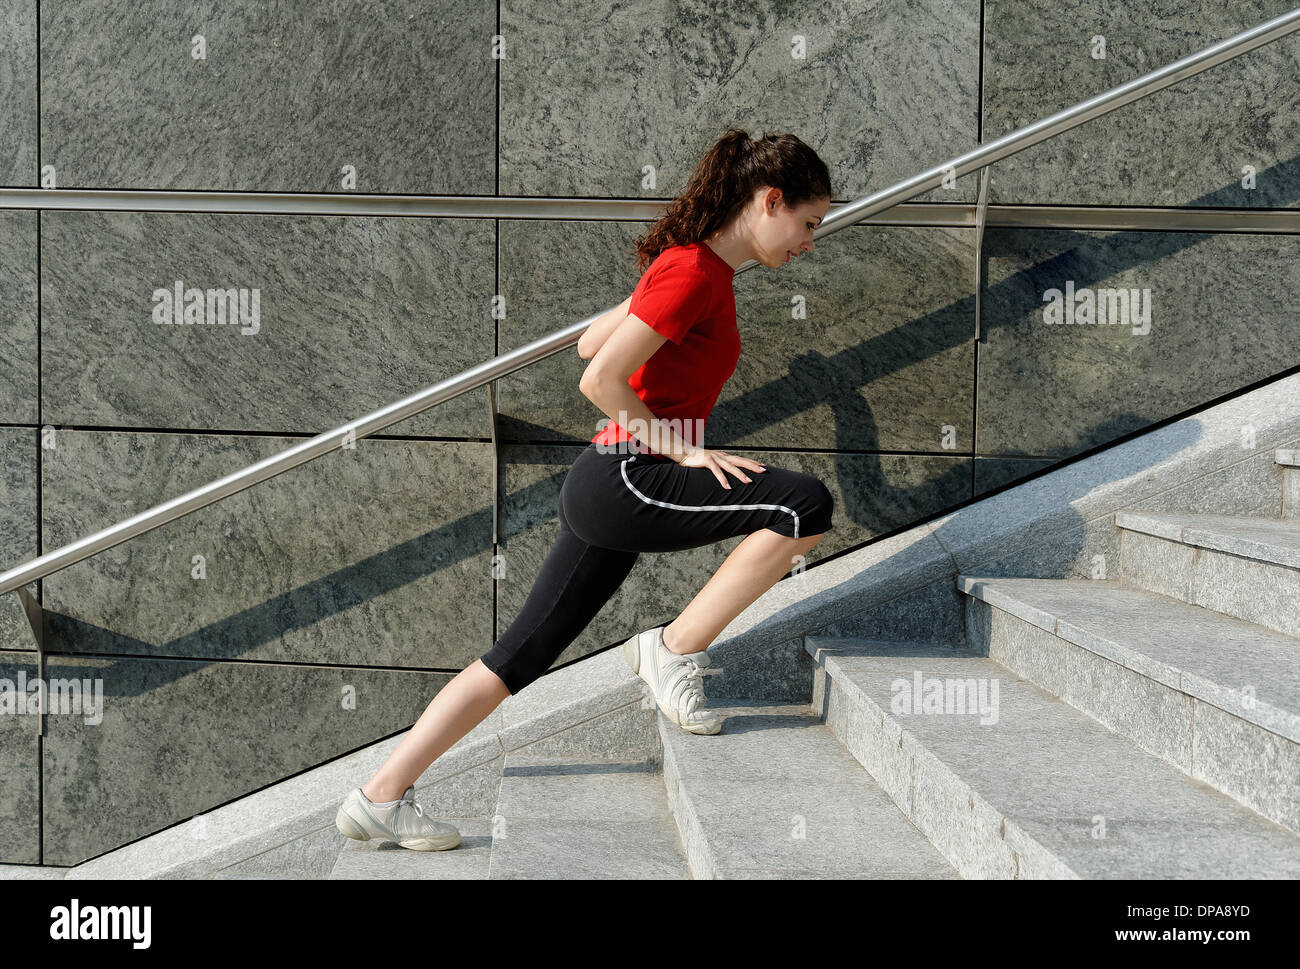 Young woman training on stairway Stock Photo